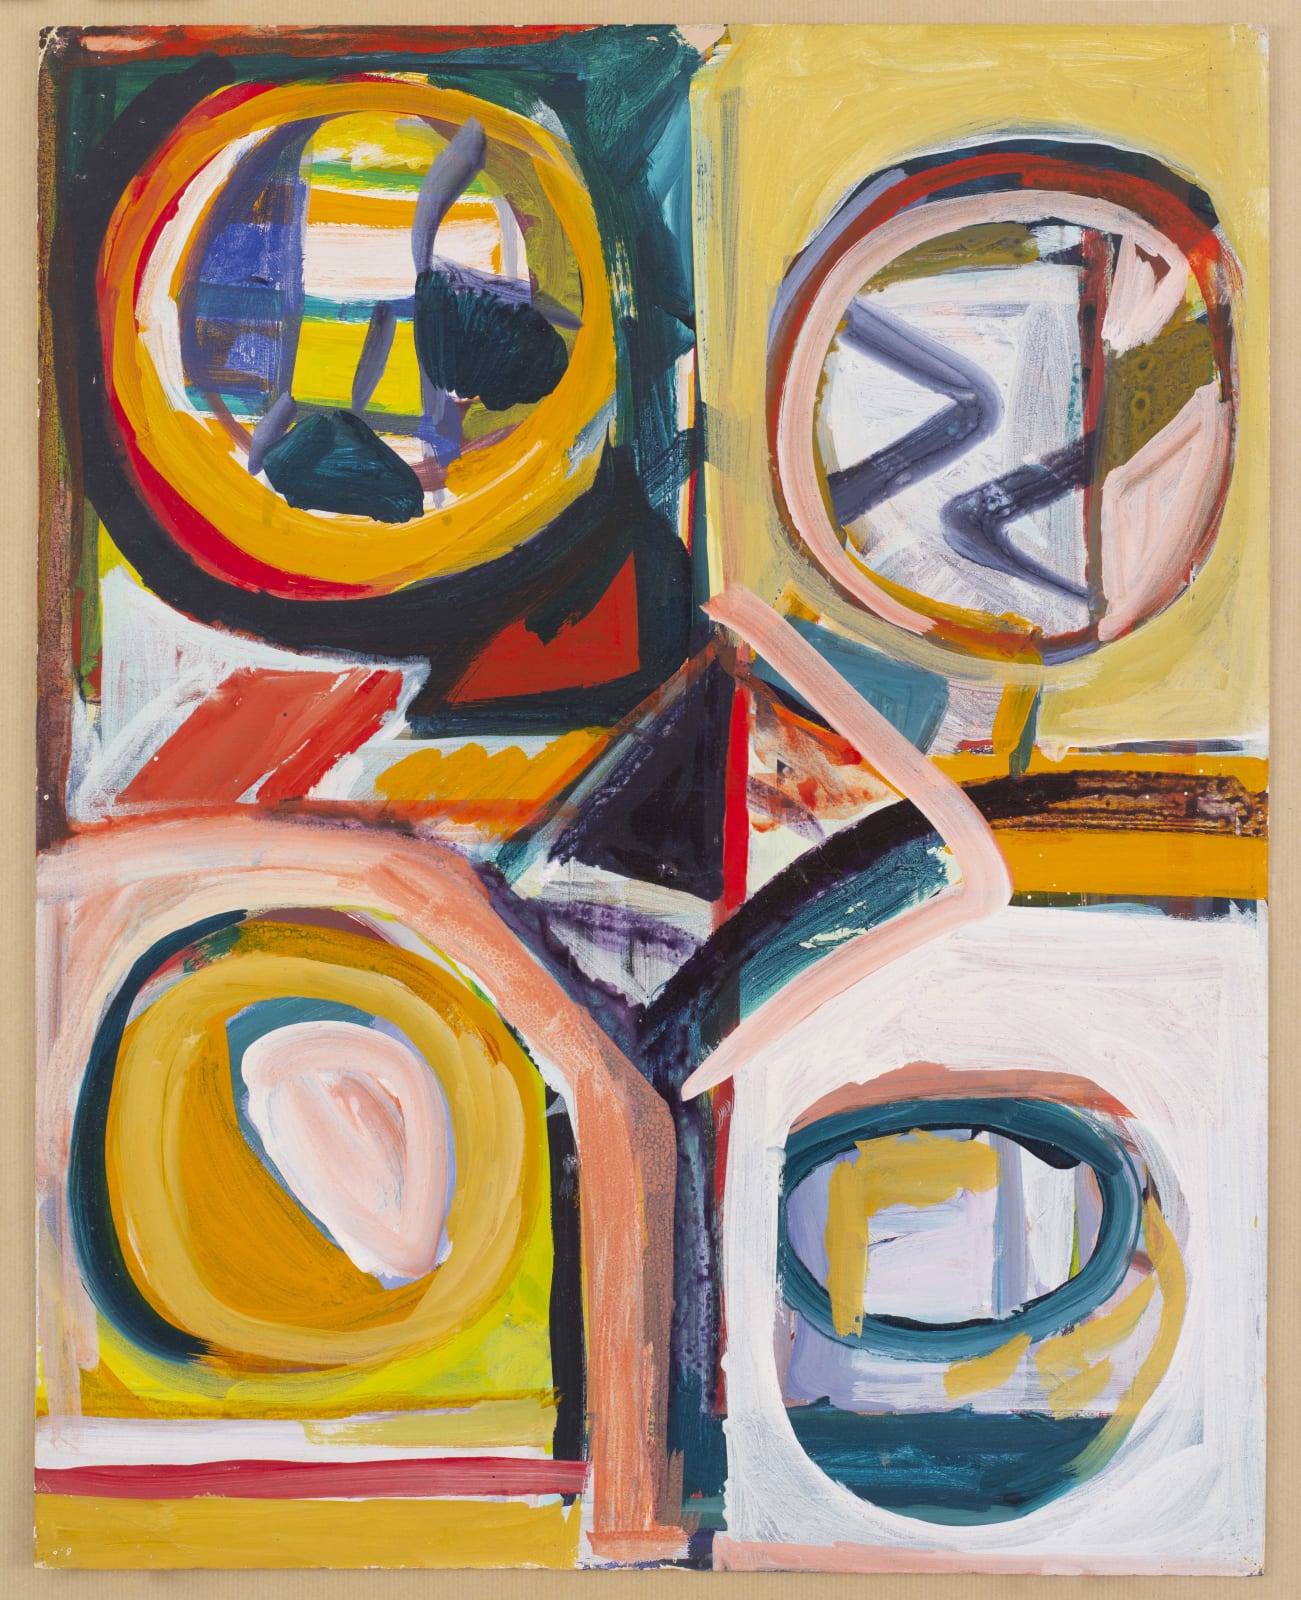 Shirley Jaffe Untitled, 1967 ca. Mixed media on paper 77,5 x 64 x 3,5 cm (30 1/2 x 25 3/16 x 1 3/8 in) framed